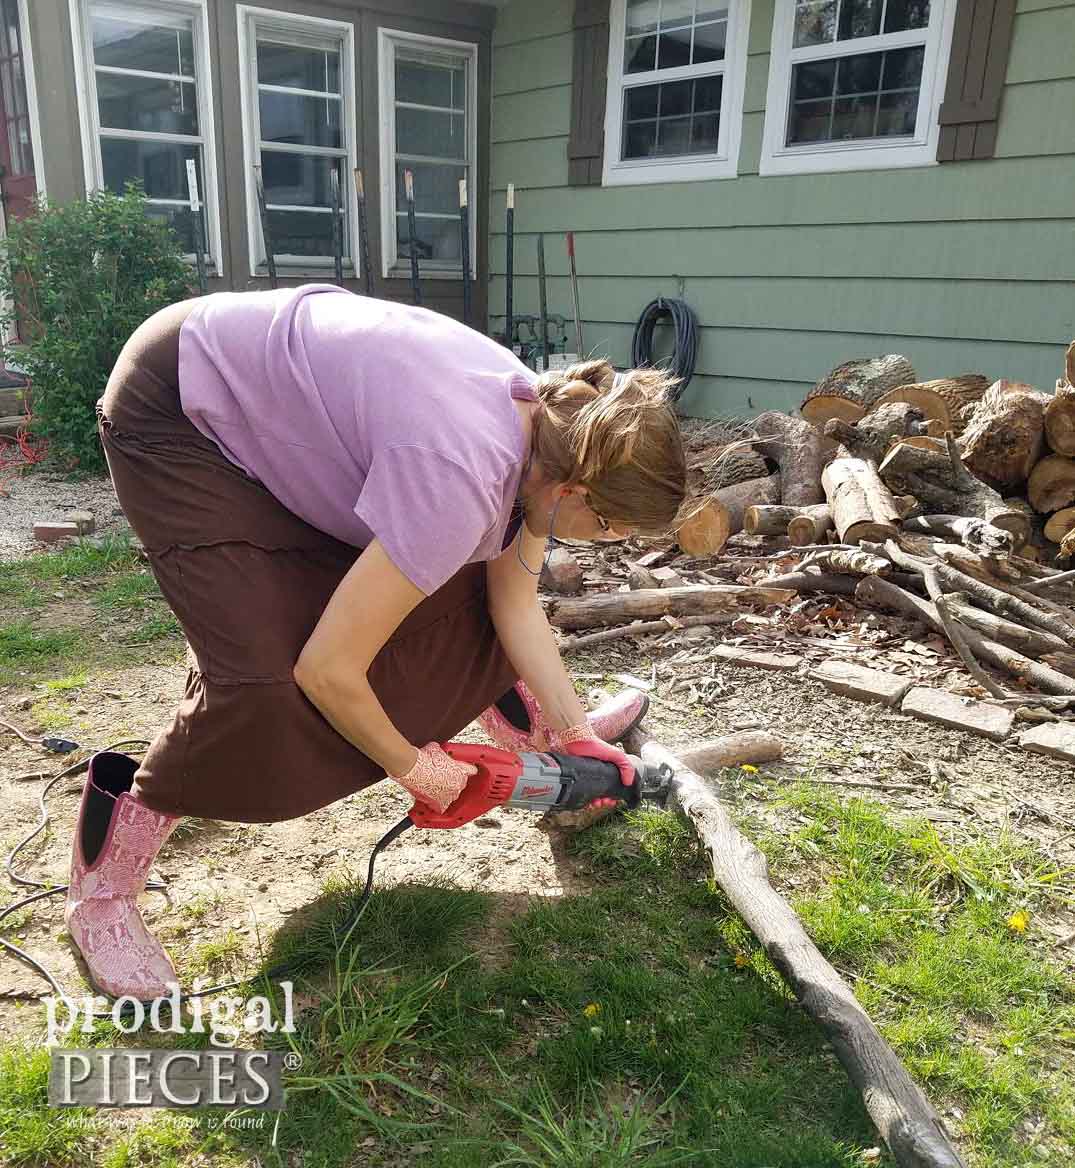 Cleaning Up Yard Waste | prodigalpieces.com